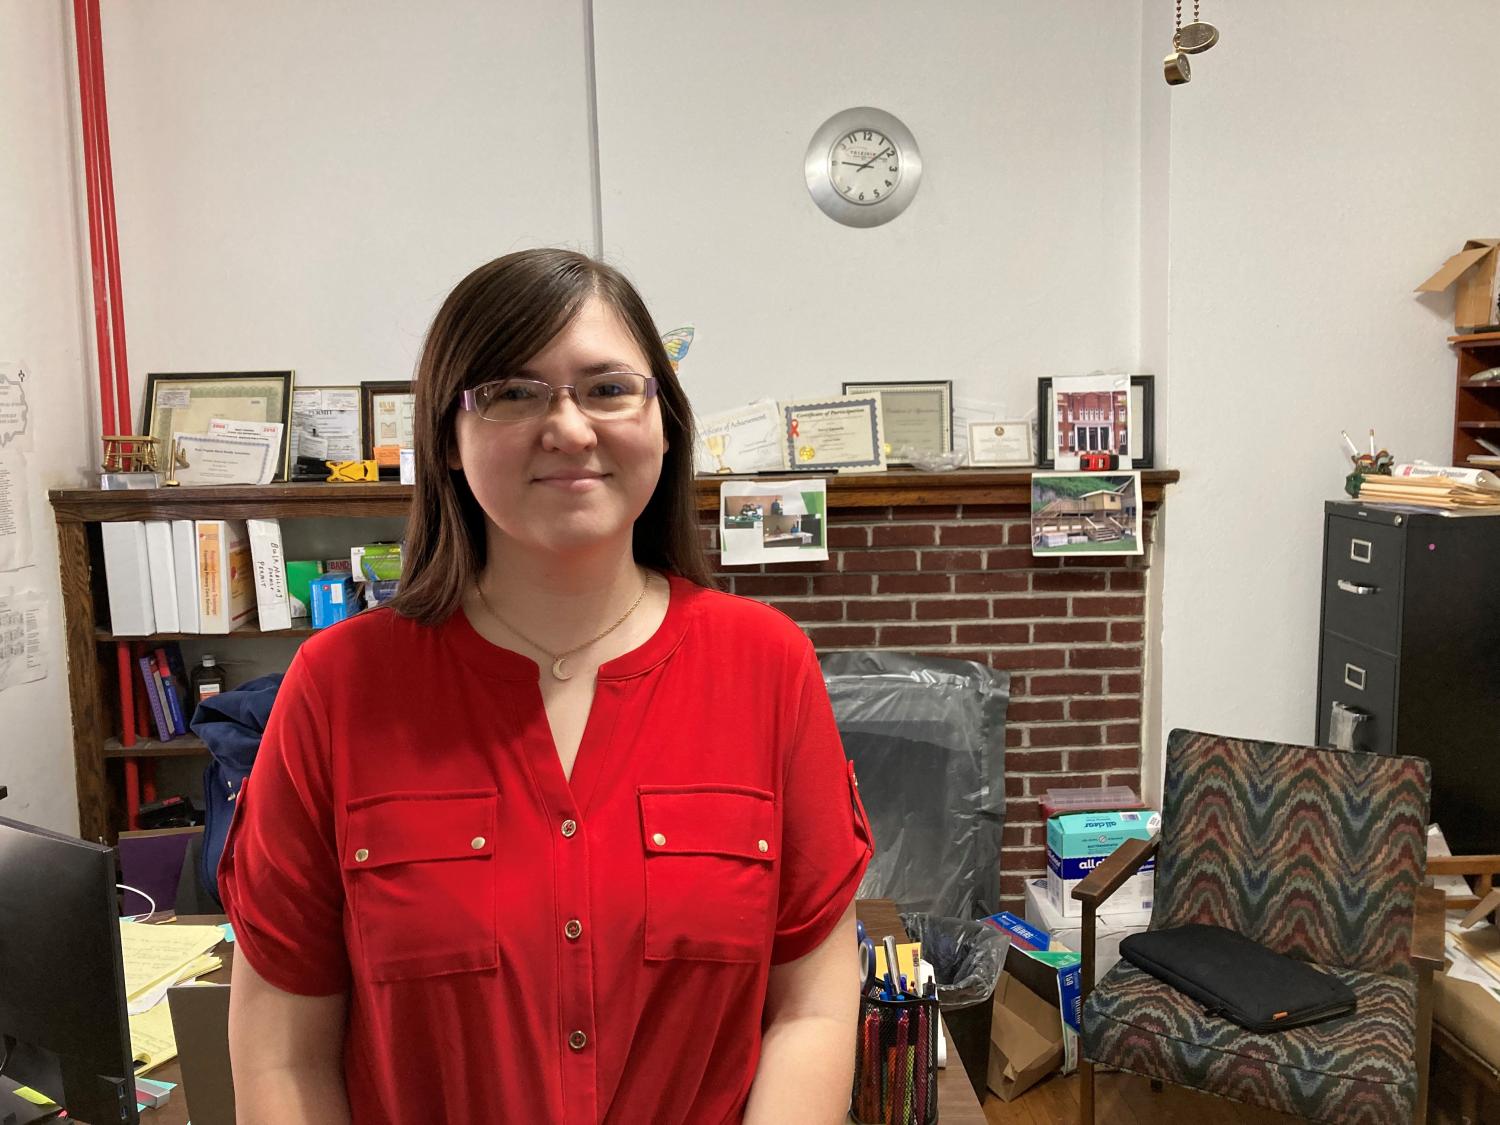 Bluefield State College student Eden Scruggs is pictured at the office of South Central Educational Development, where she recently completed a Project Success paid internship.